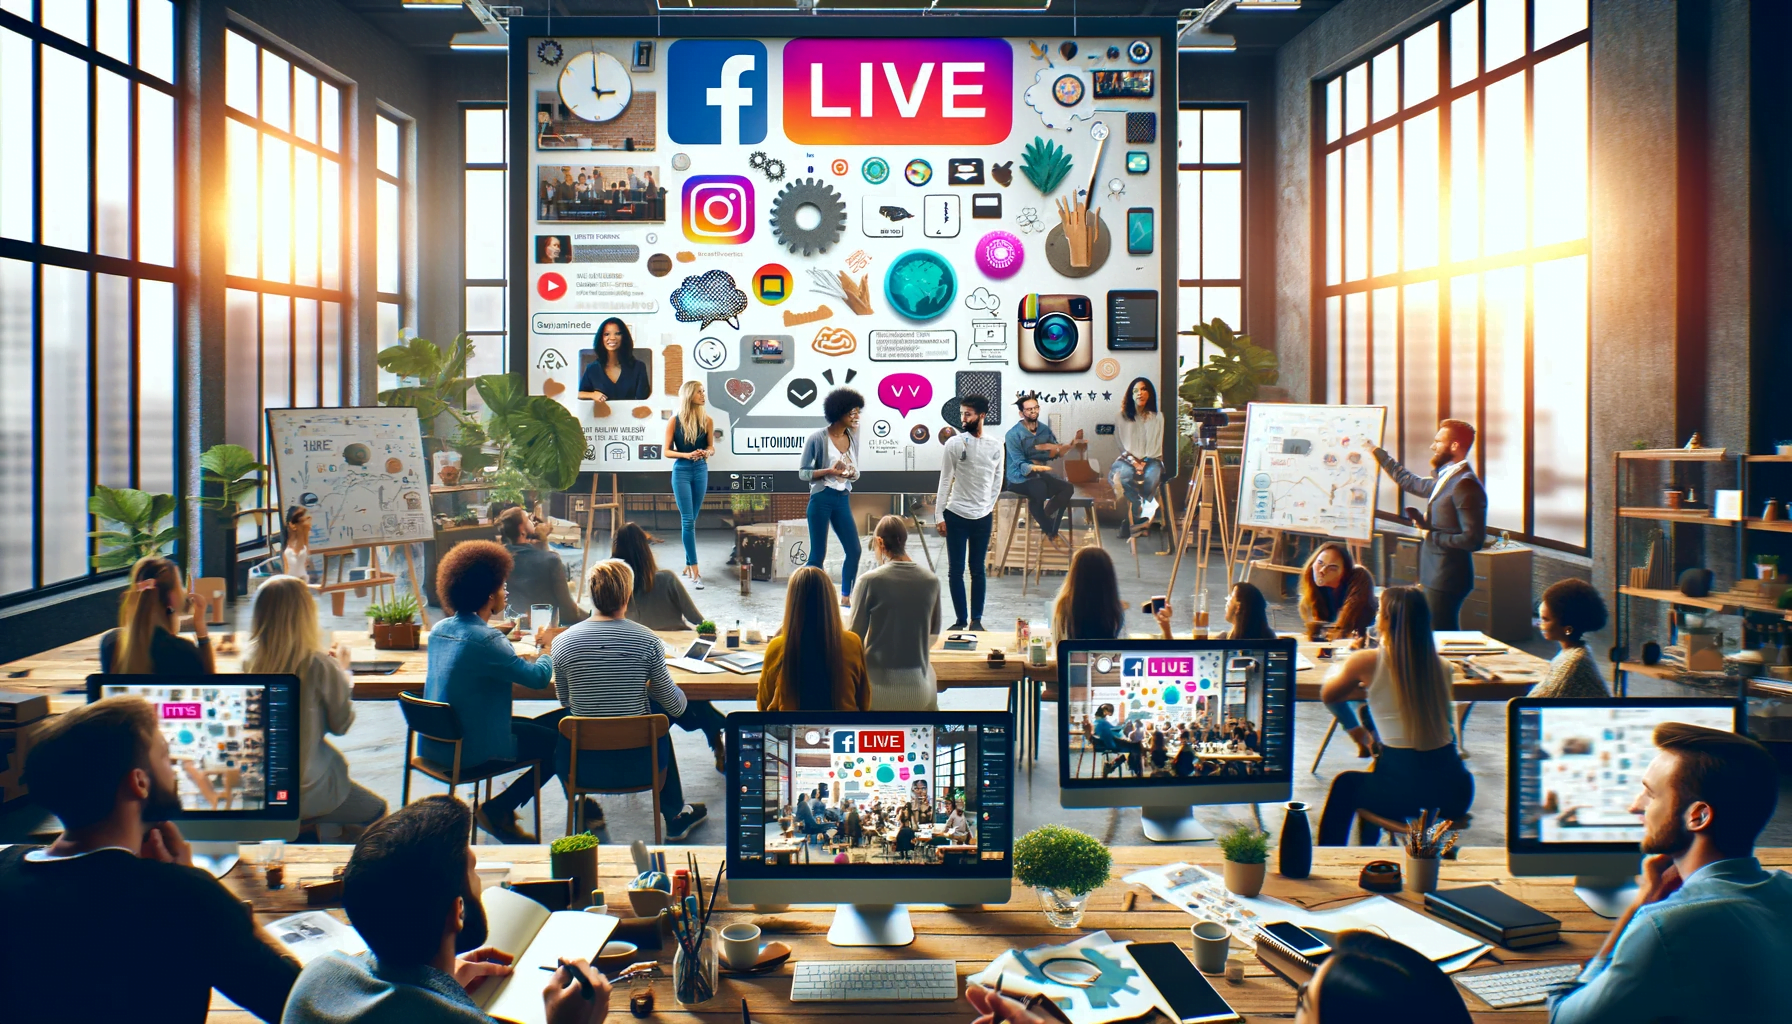 Diverse professionals engaging in an Instagram Live session in a modern office setting, showcasing social media engagement and live streaming techniques.